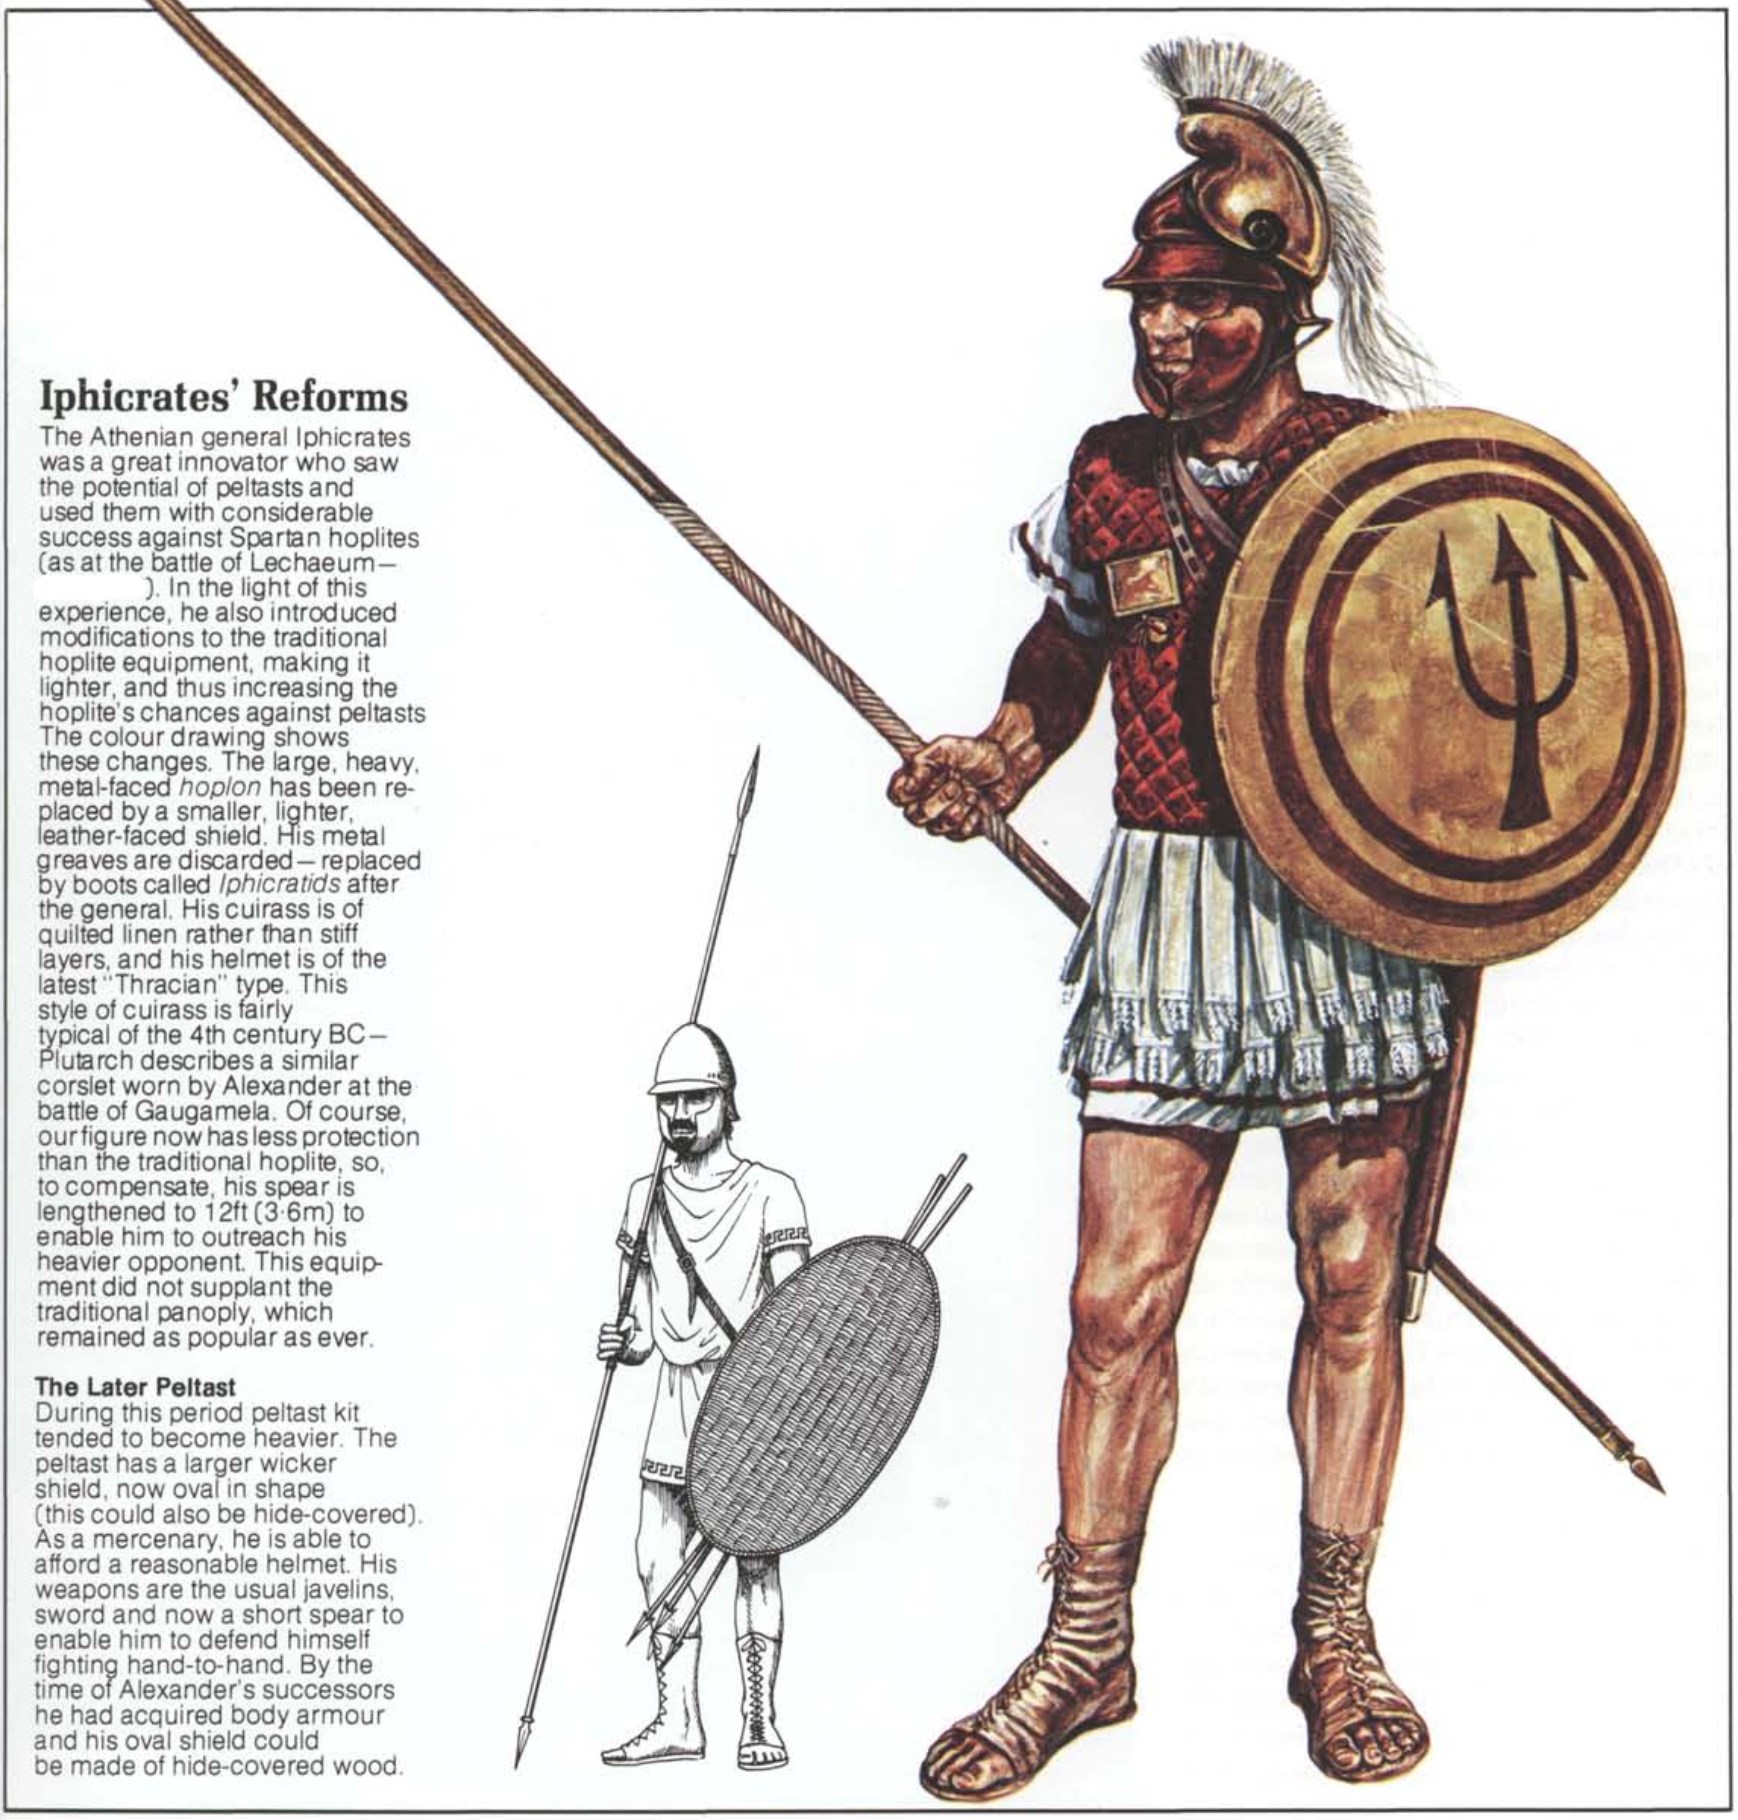 The Age of Light Armed Greek Warrior I